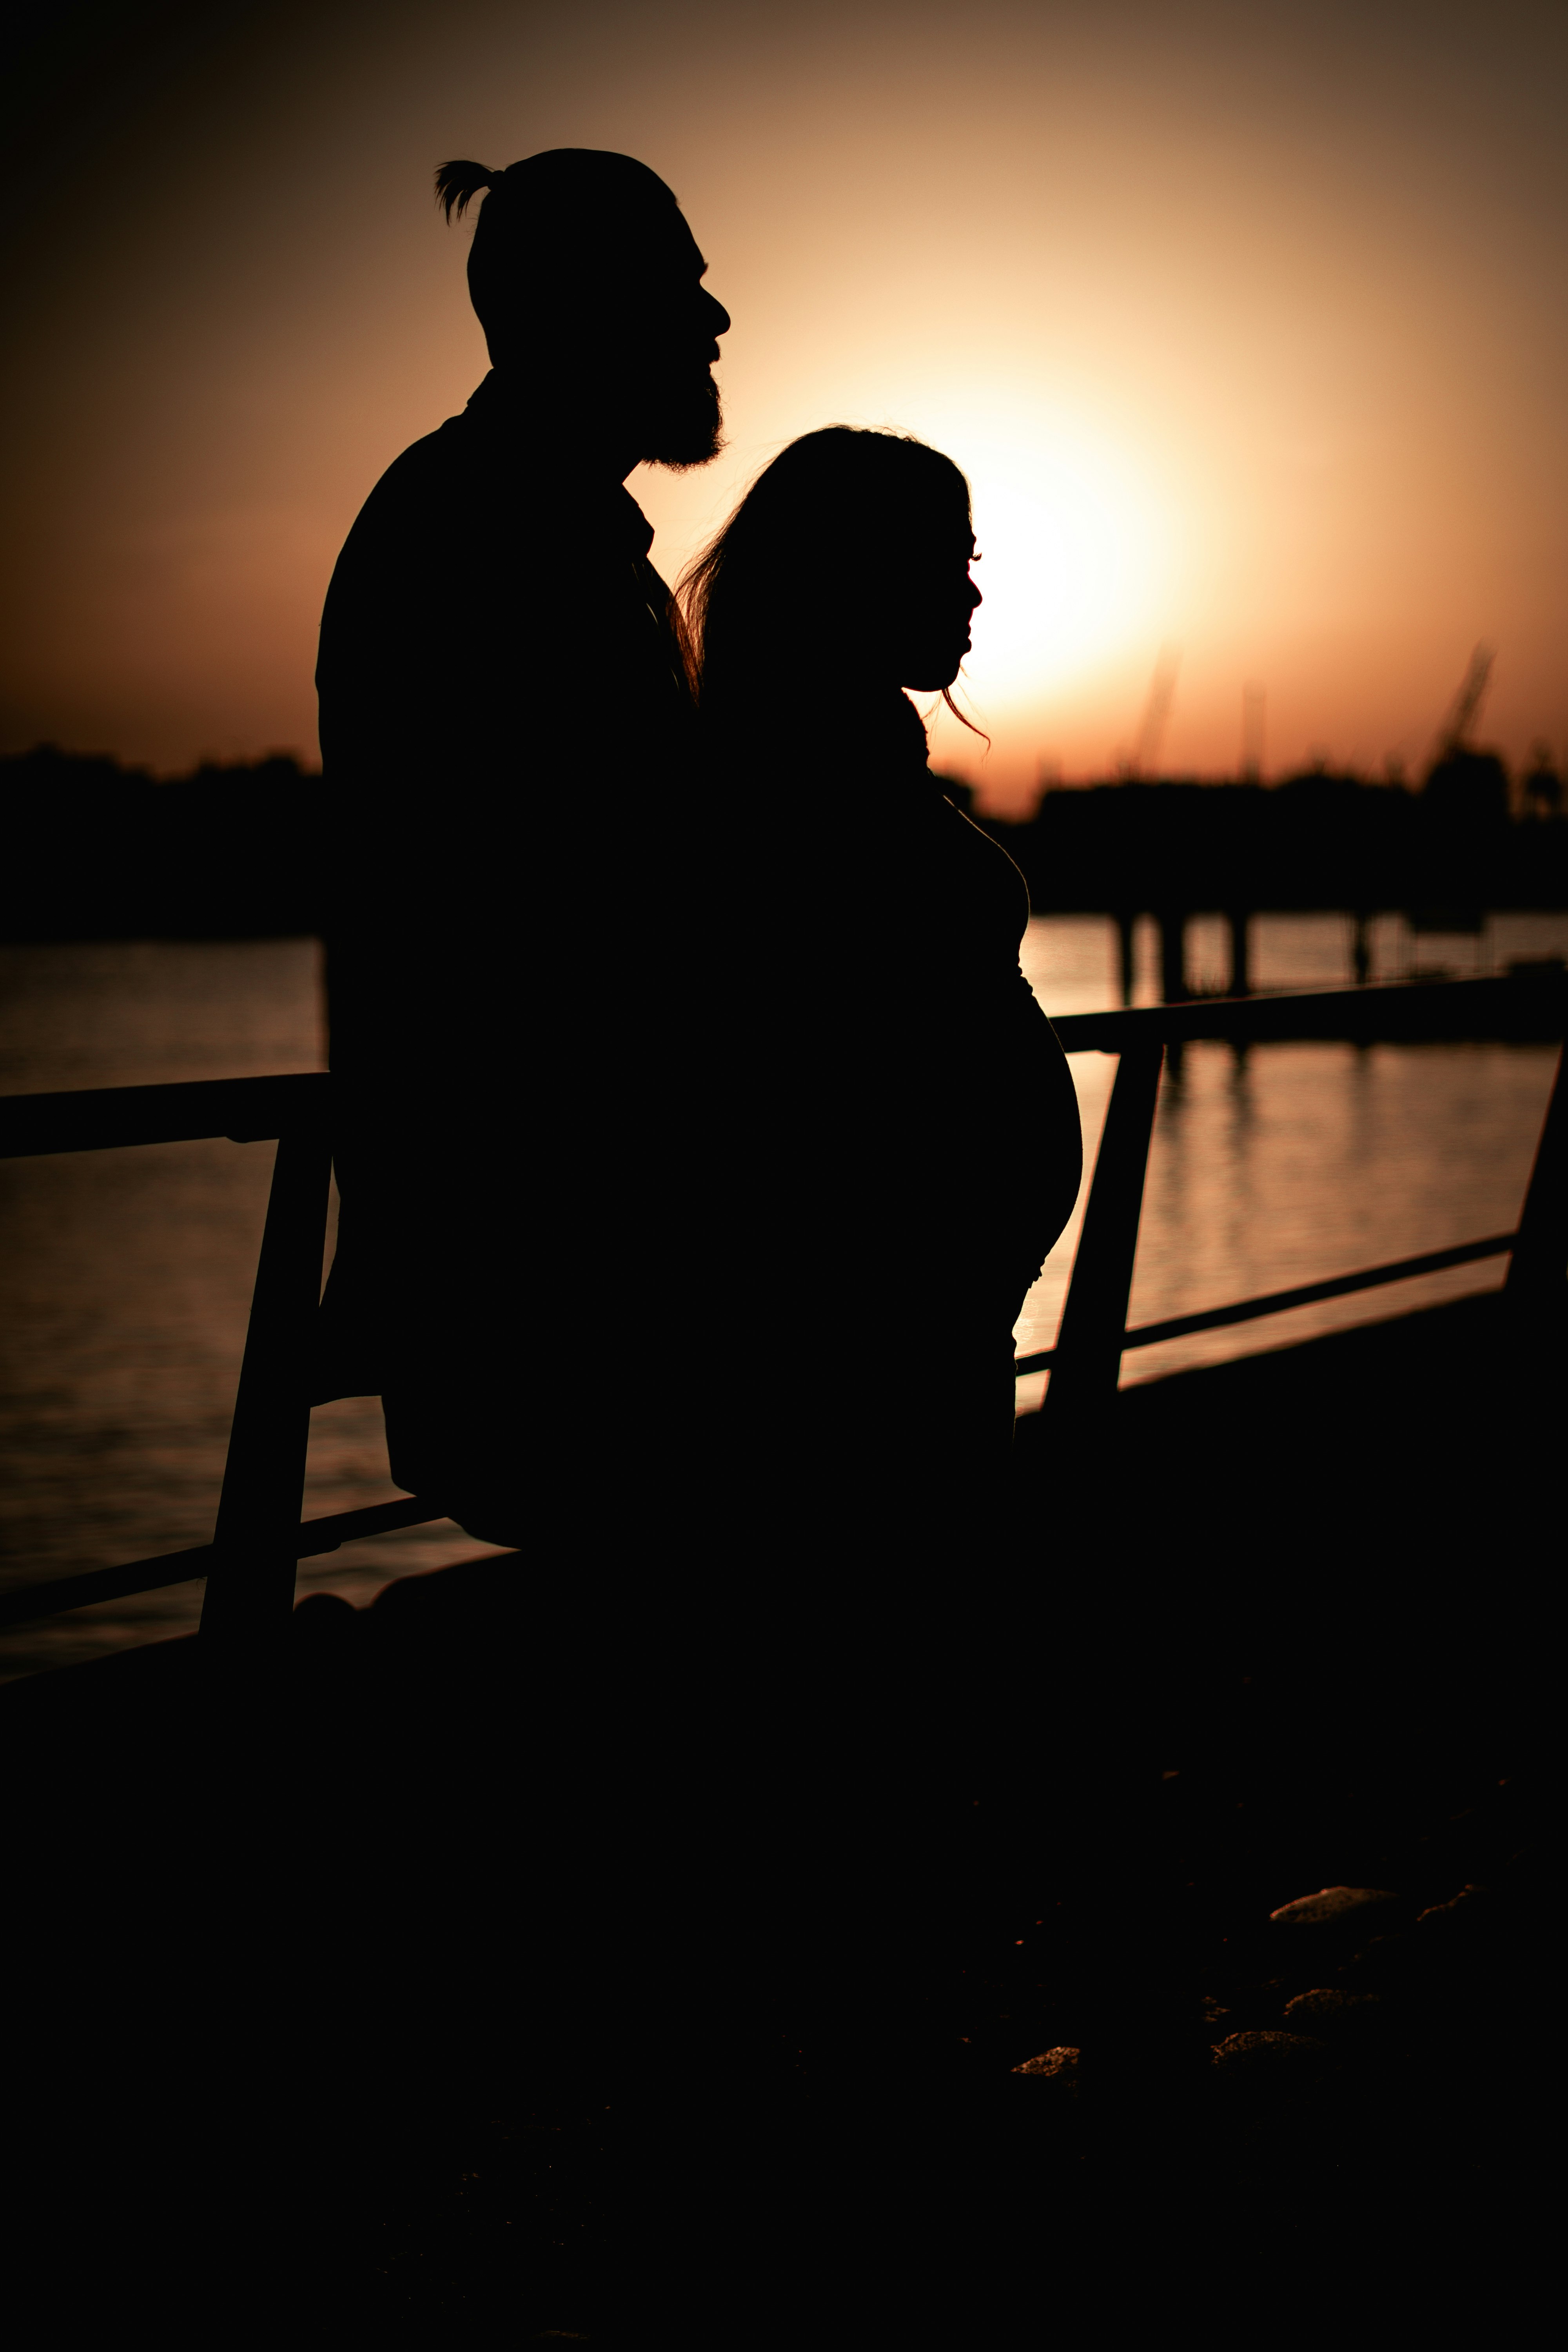 silhouette of man and woman standing beside body of water during sunset